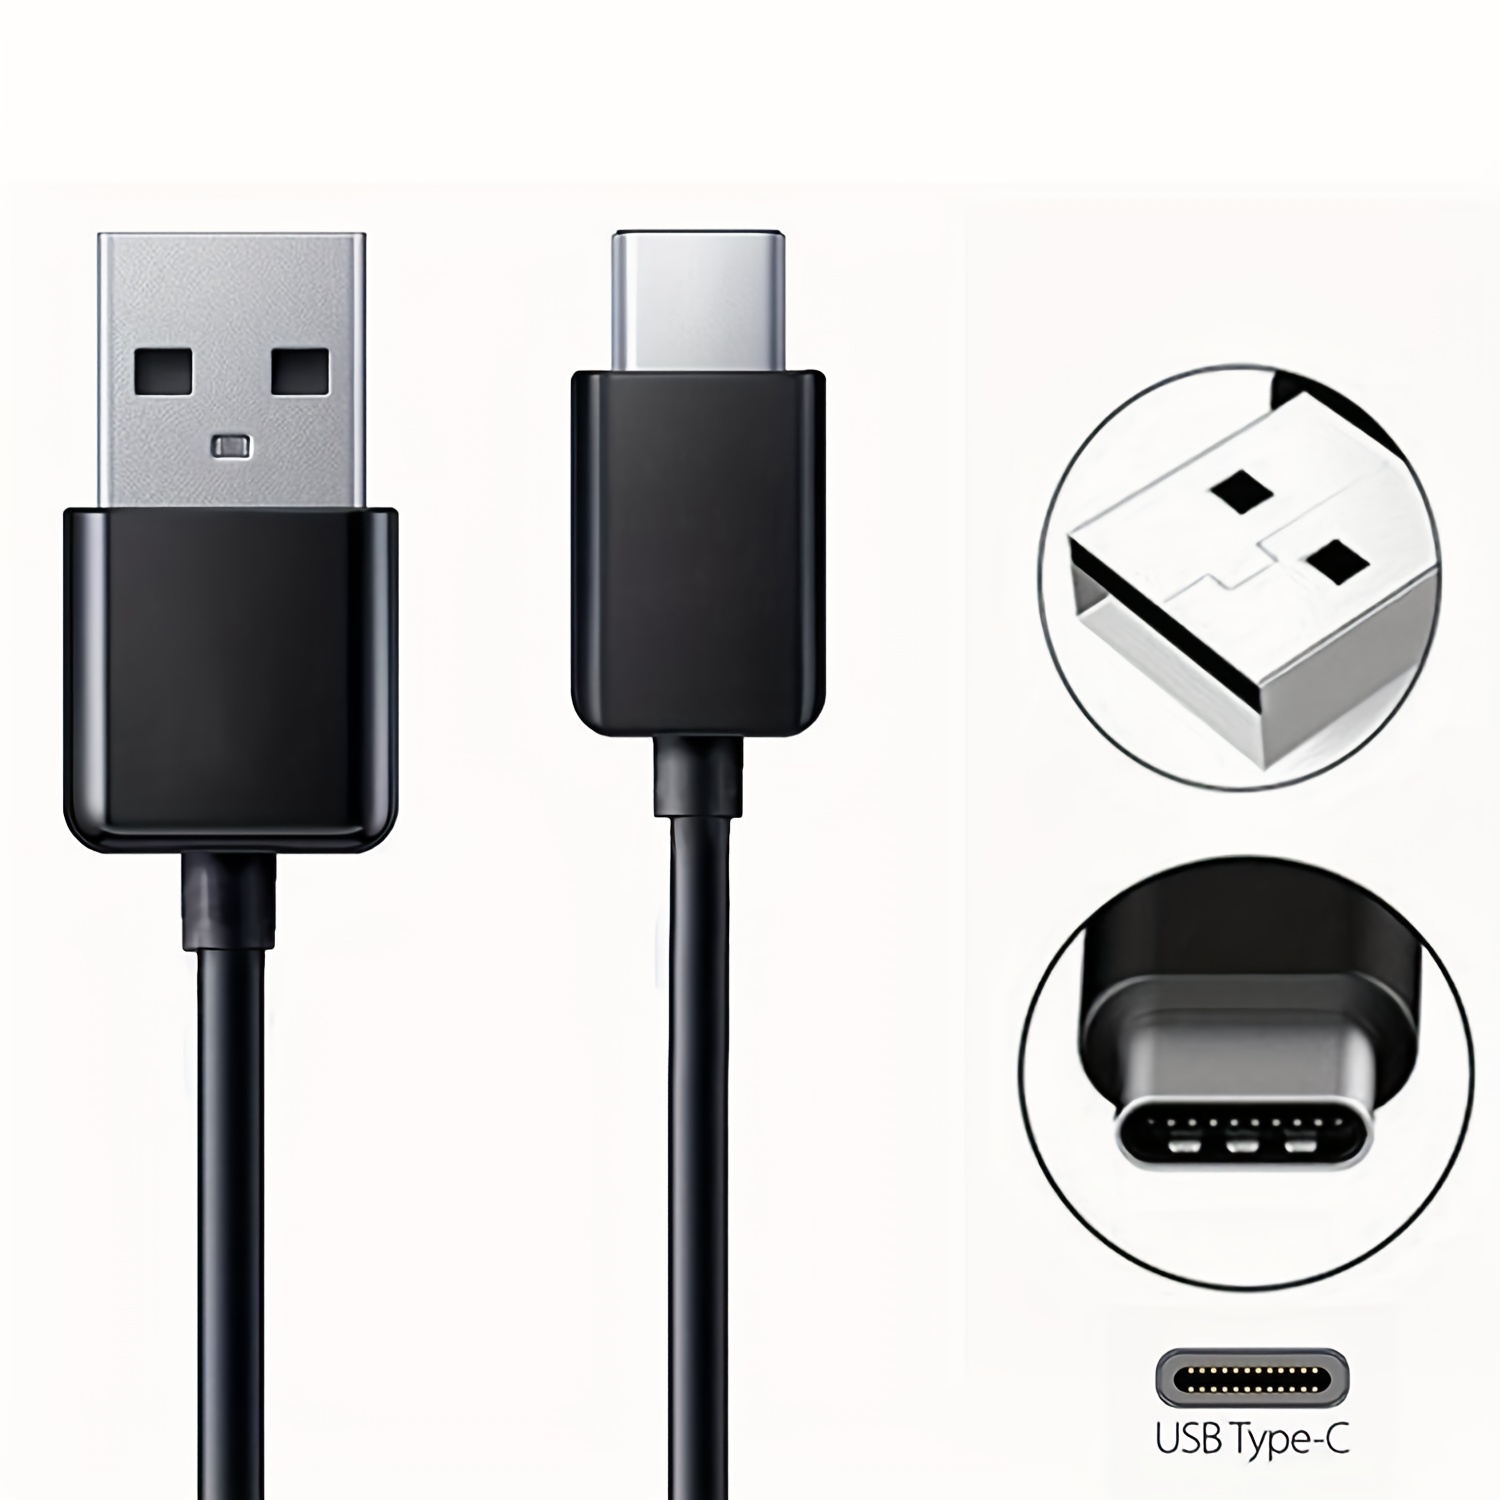 Type-C USB Data/Charger Cable for Sony WH-XB700, WH-XB900N Bluetooth Wireless Headphones - image 3 of 4